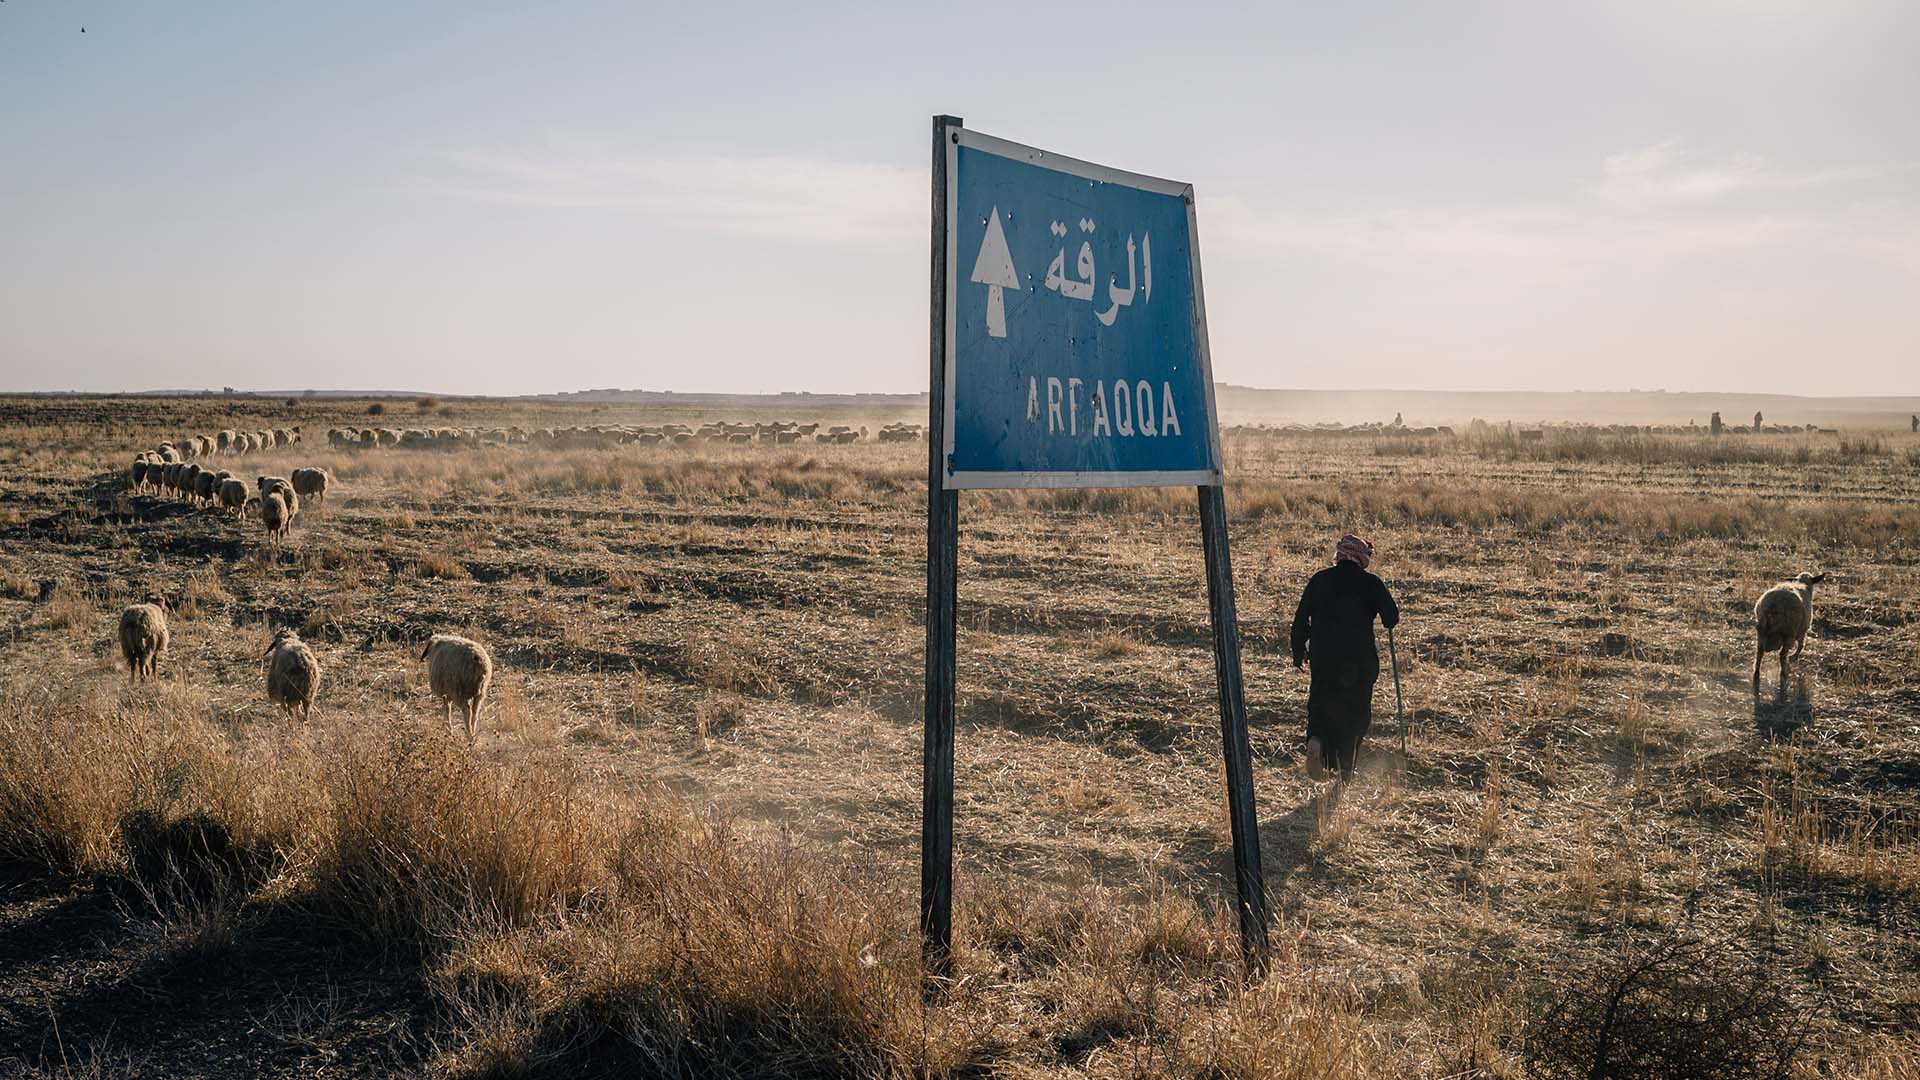 The photograph captures a signboard displaying the name of Raqqa, while in the background, a shepherd tends to his flock of sheep.